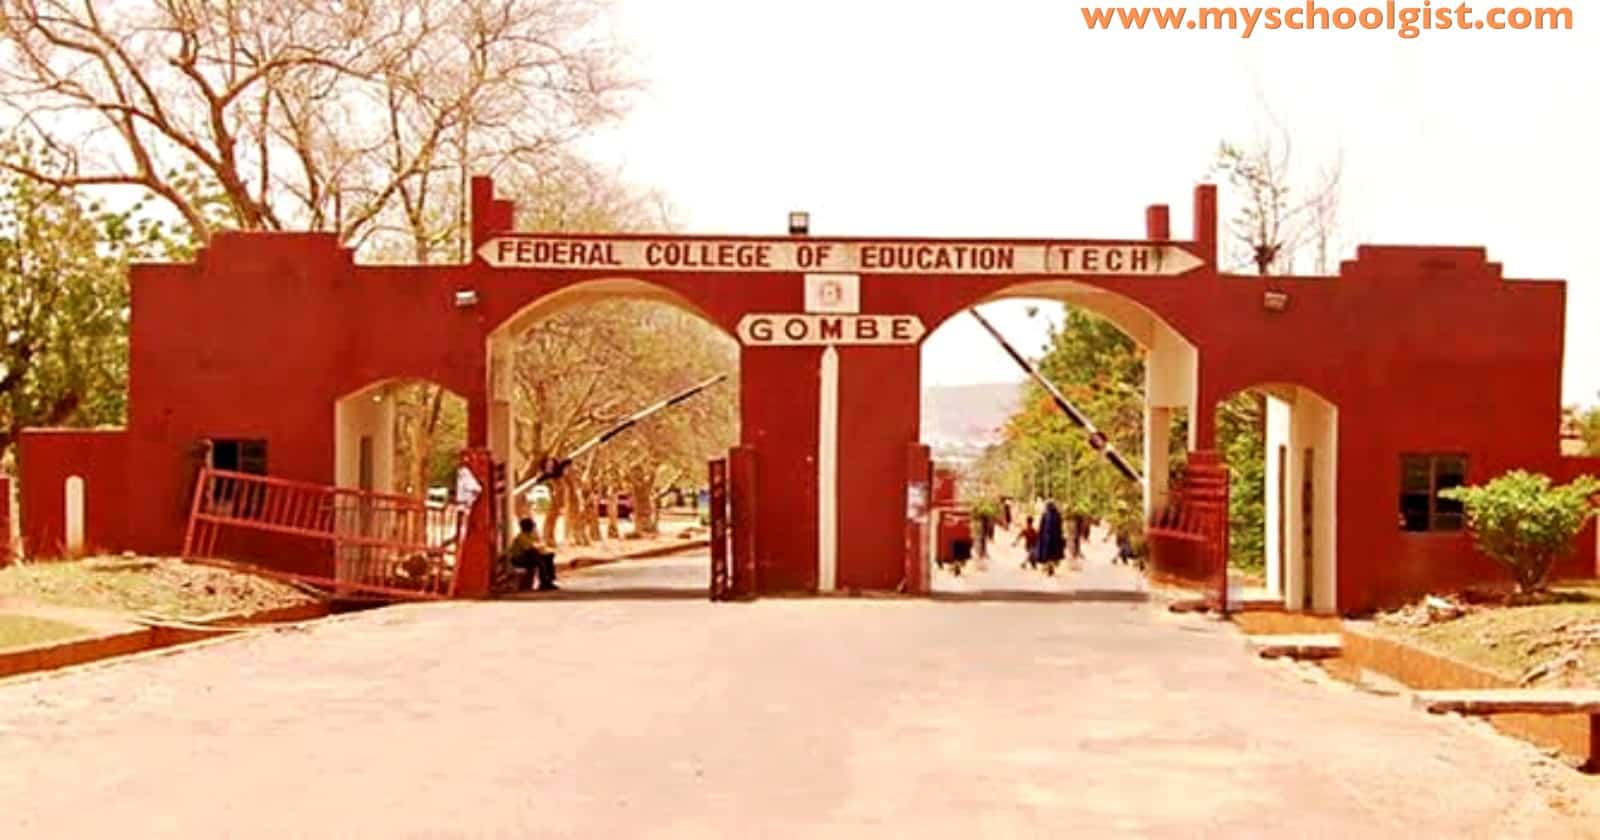 FCE (Technical) Gombe NCE Weekend Admission Form